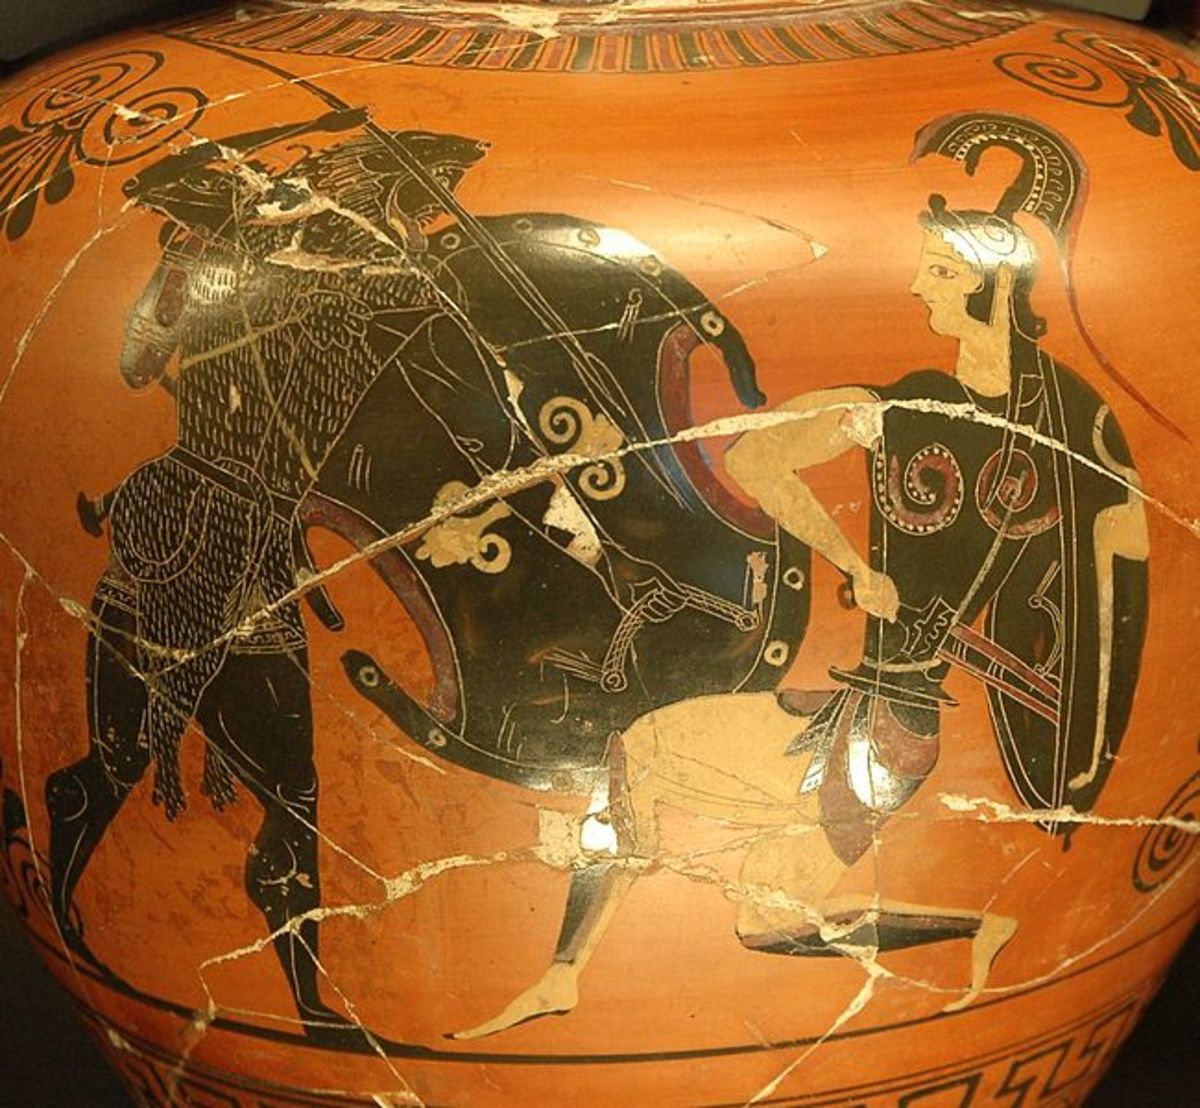 Heracles battles with an Amazon warrior.